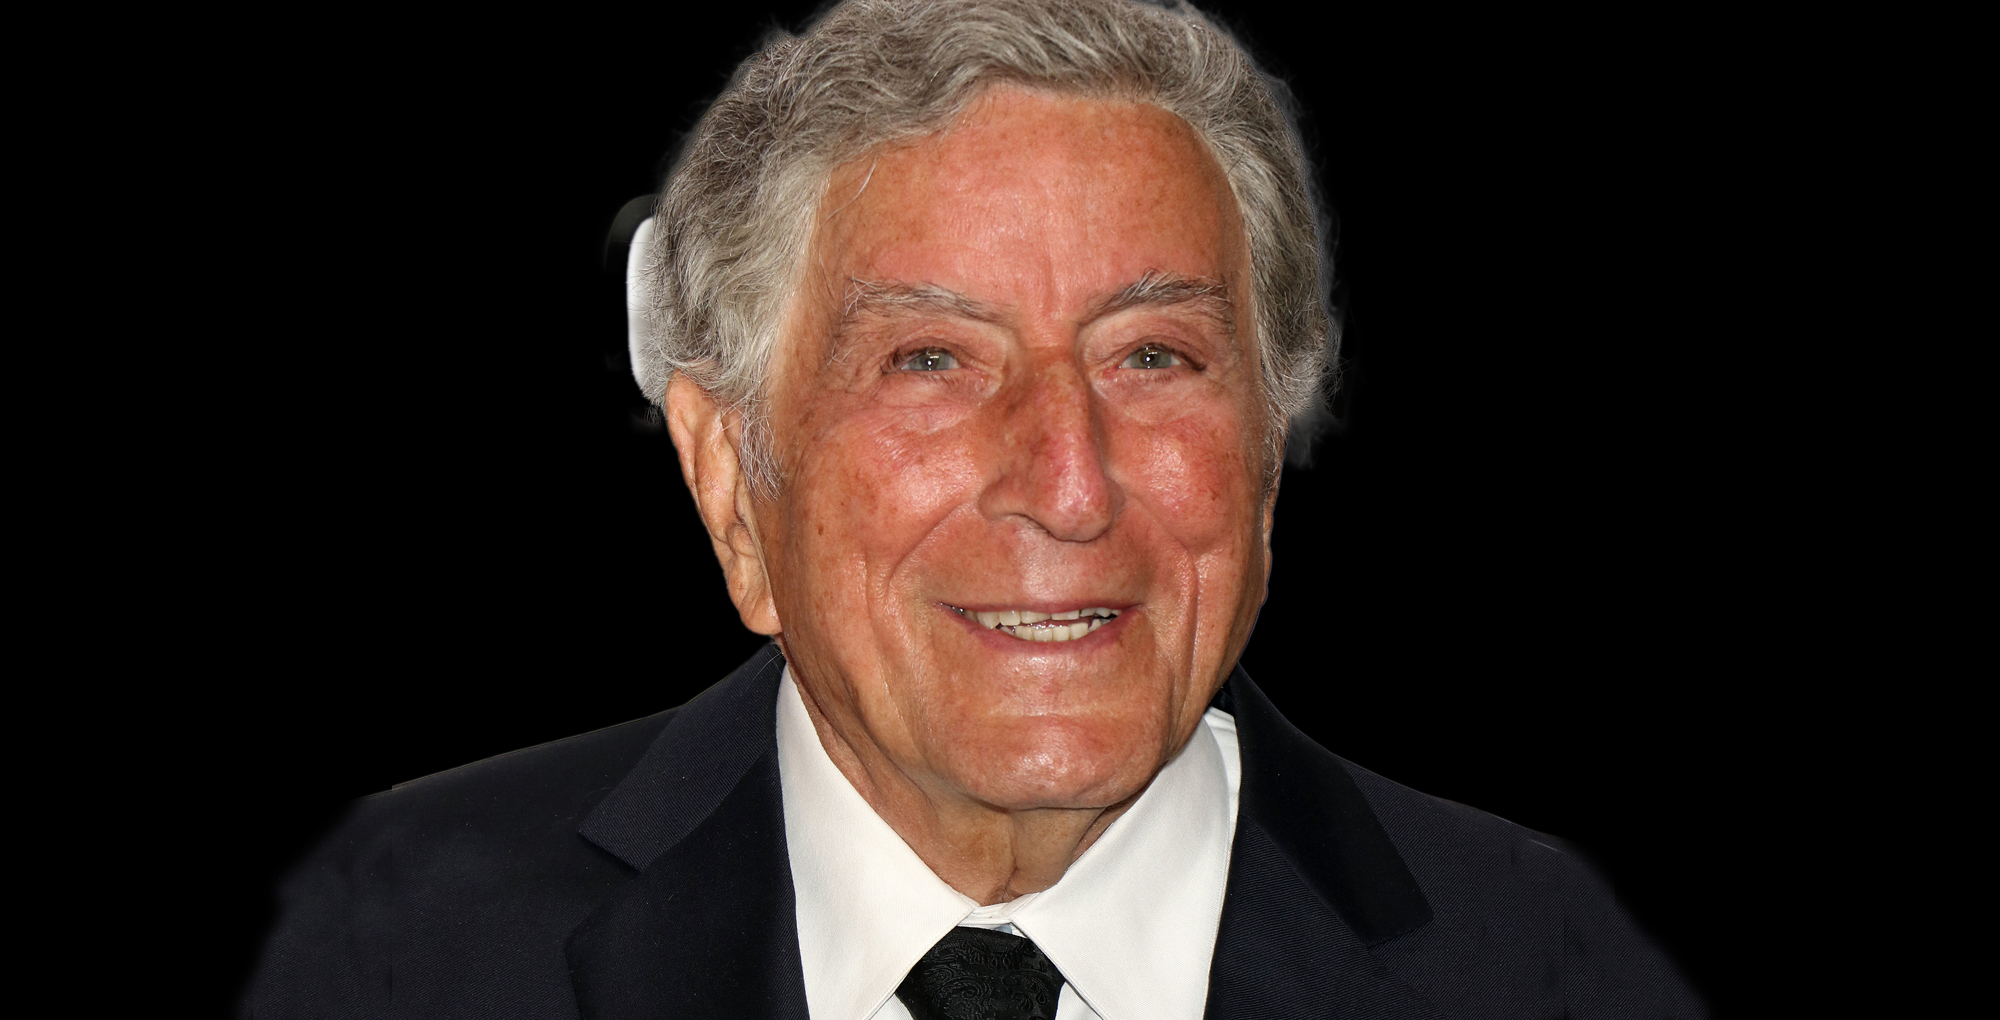 tony bennett, who guest starred on as the world turns, has passed away.